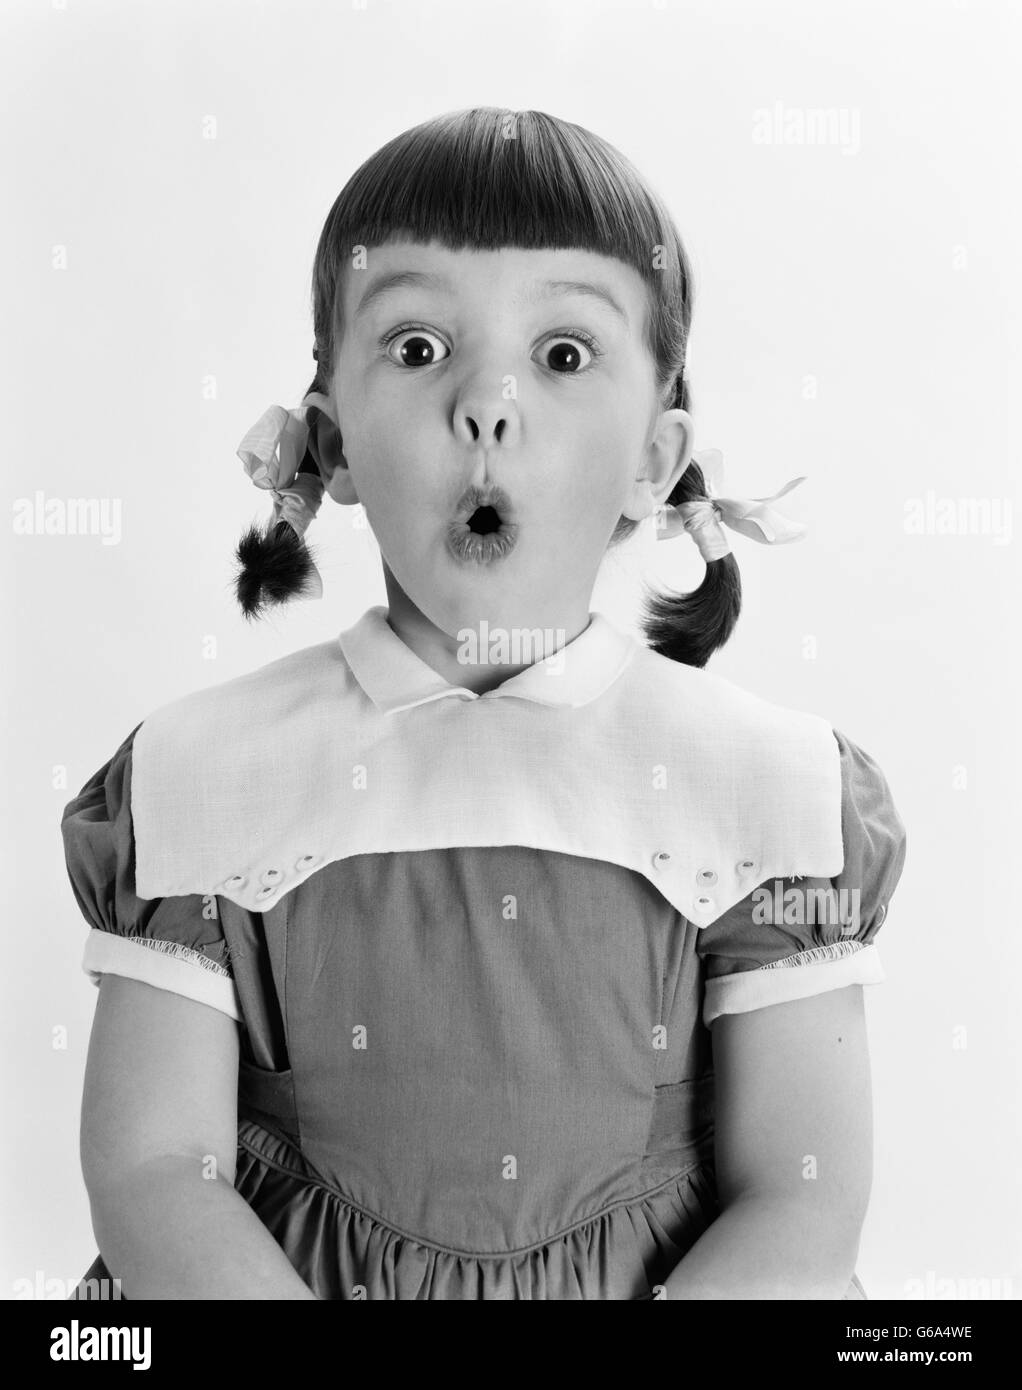 1950s PORTRAIT GIRL HAIR IN PIGTAILS SURPRISED EXPRESSION MOUTH WIDE OPEN LOOKING AT CAMERA Stock Photo